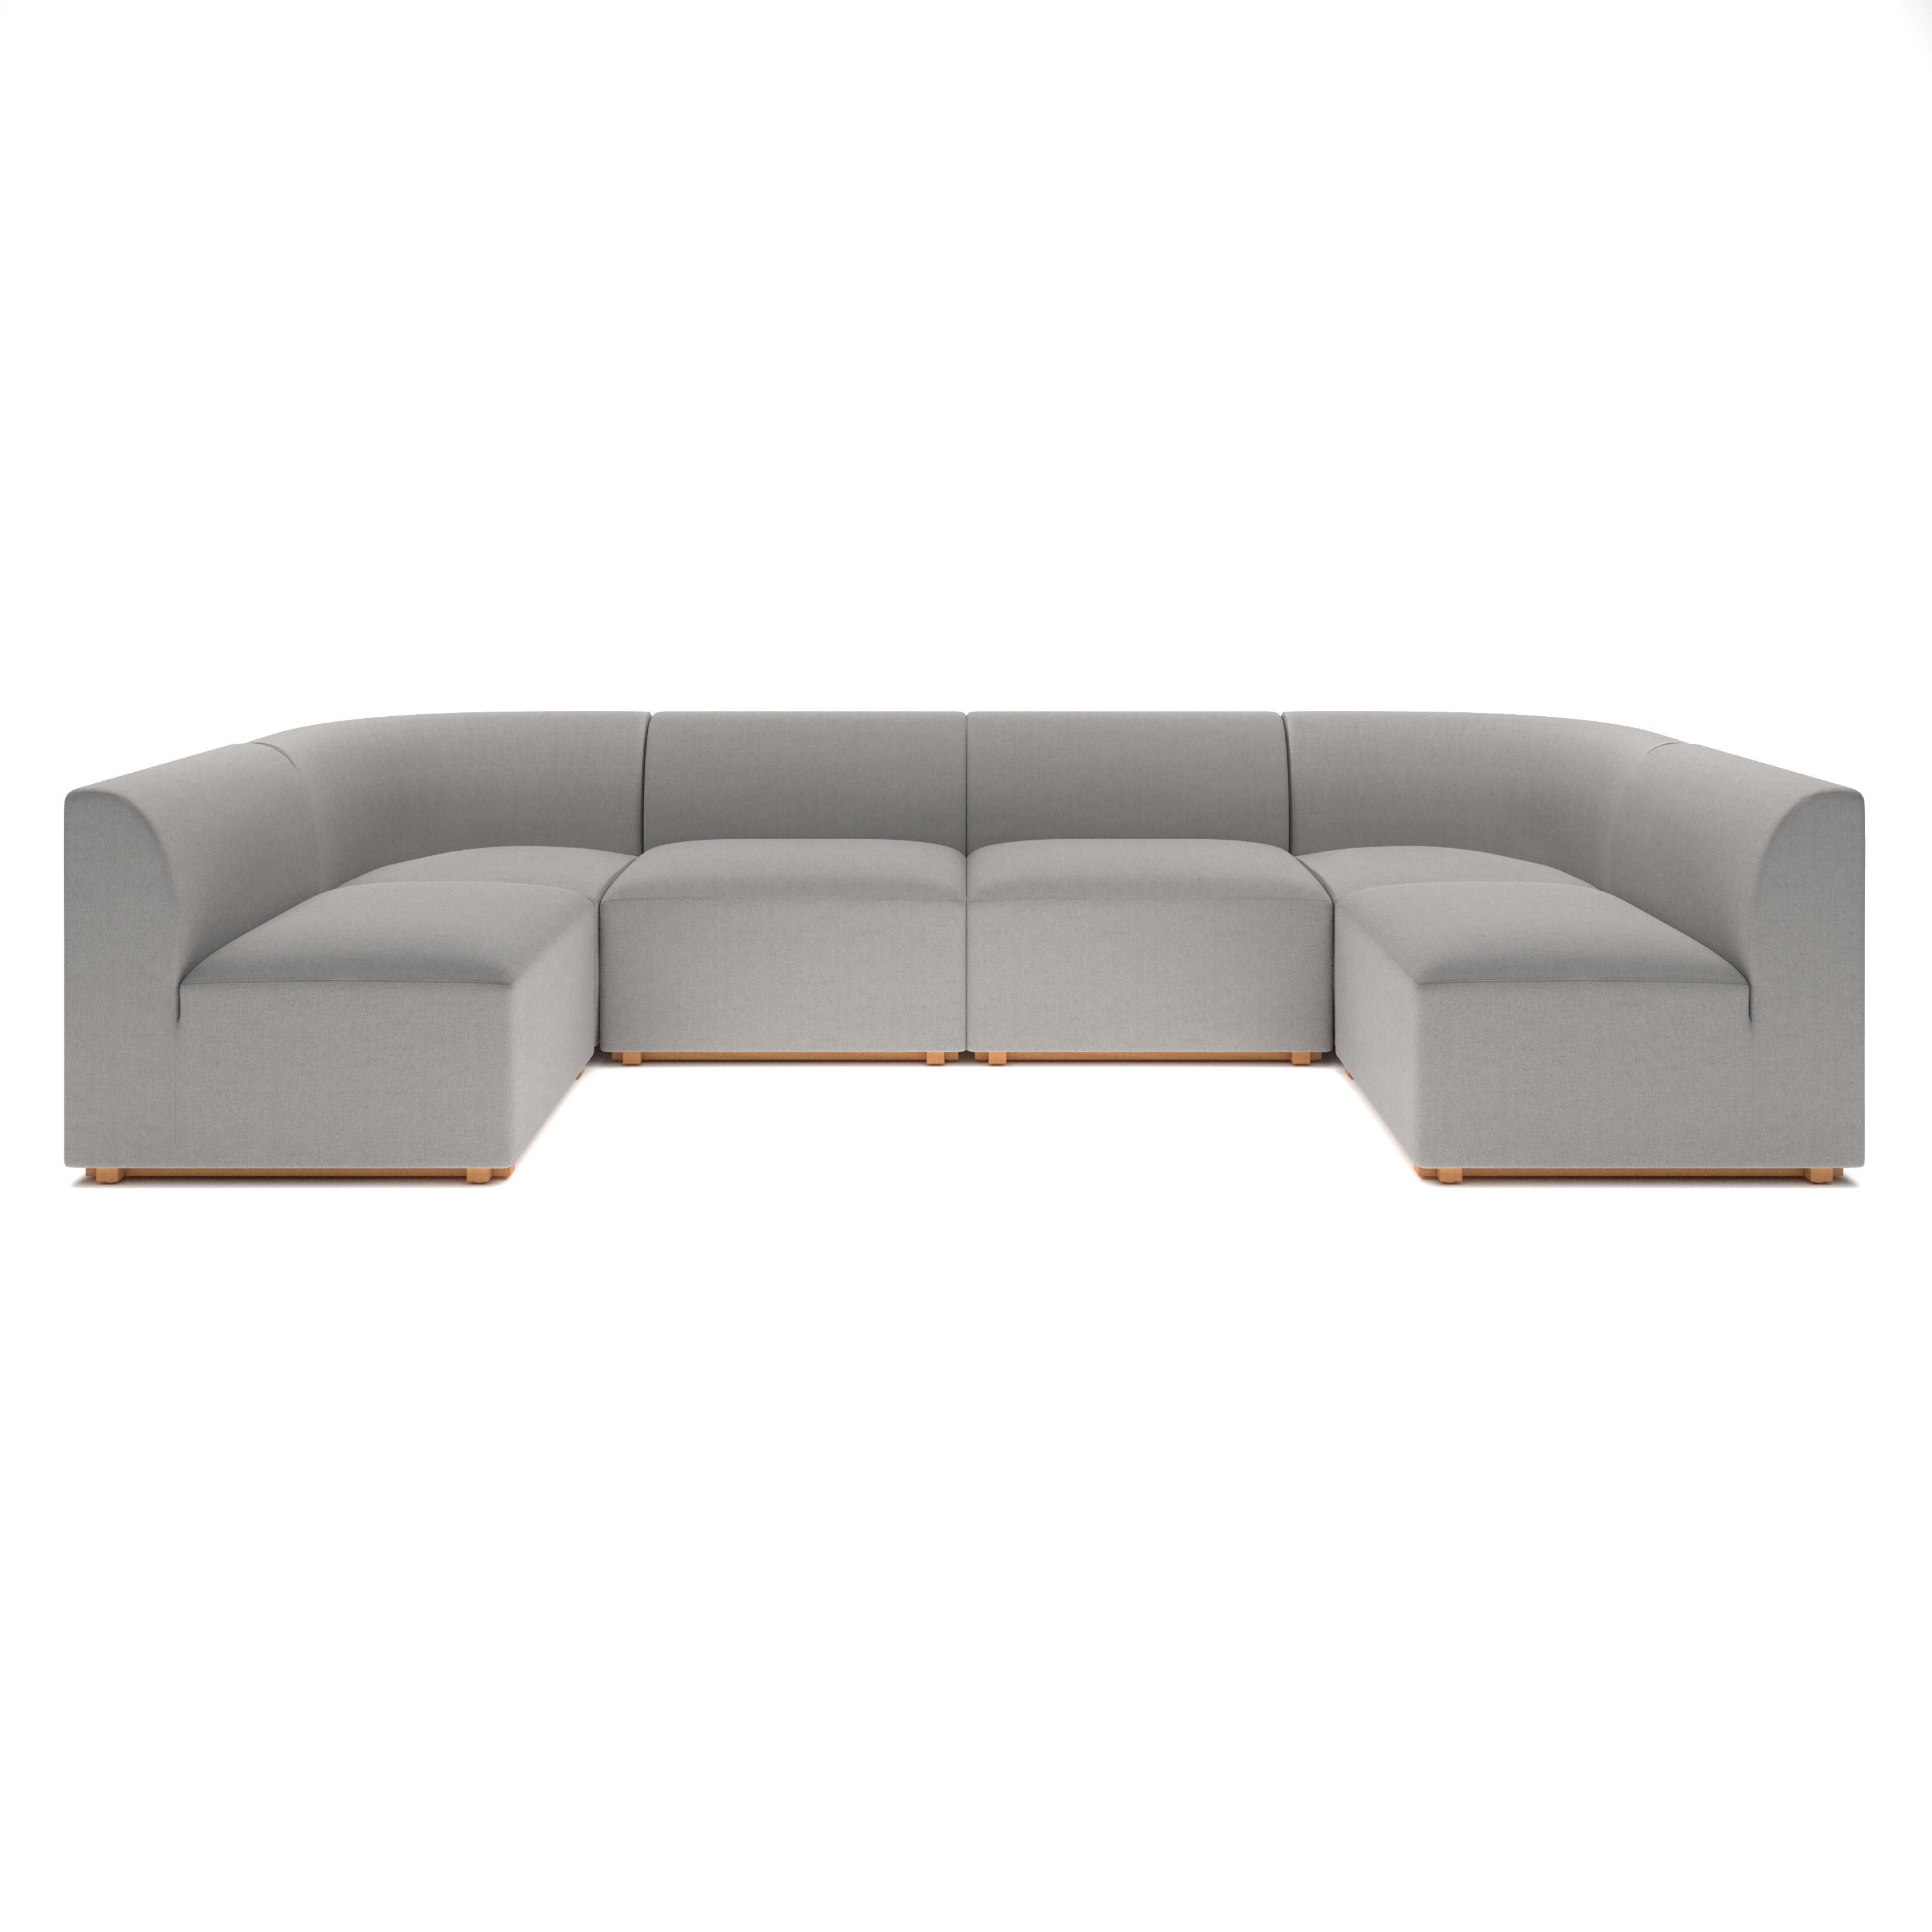 Blockhouse Modular Sectional – 6 Seat U Shaped Sofa | Rypen Collections |  Rypen Inside 6 Seater Sectional Couches (View 8 of 15)